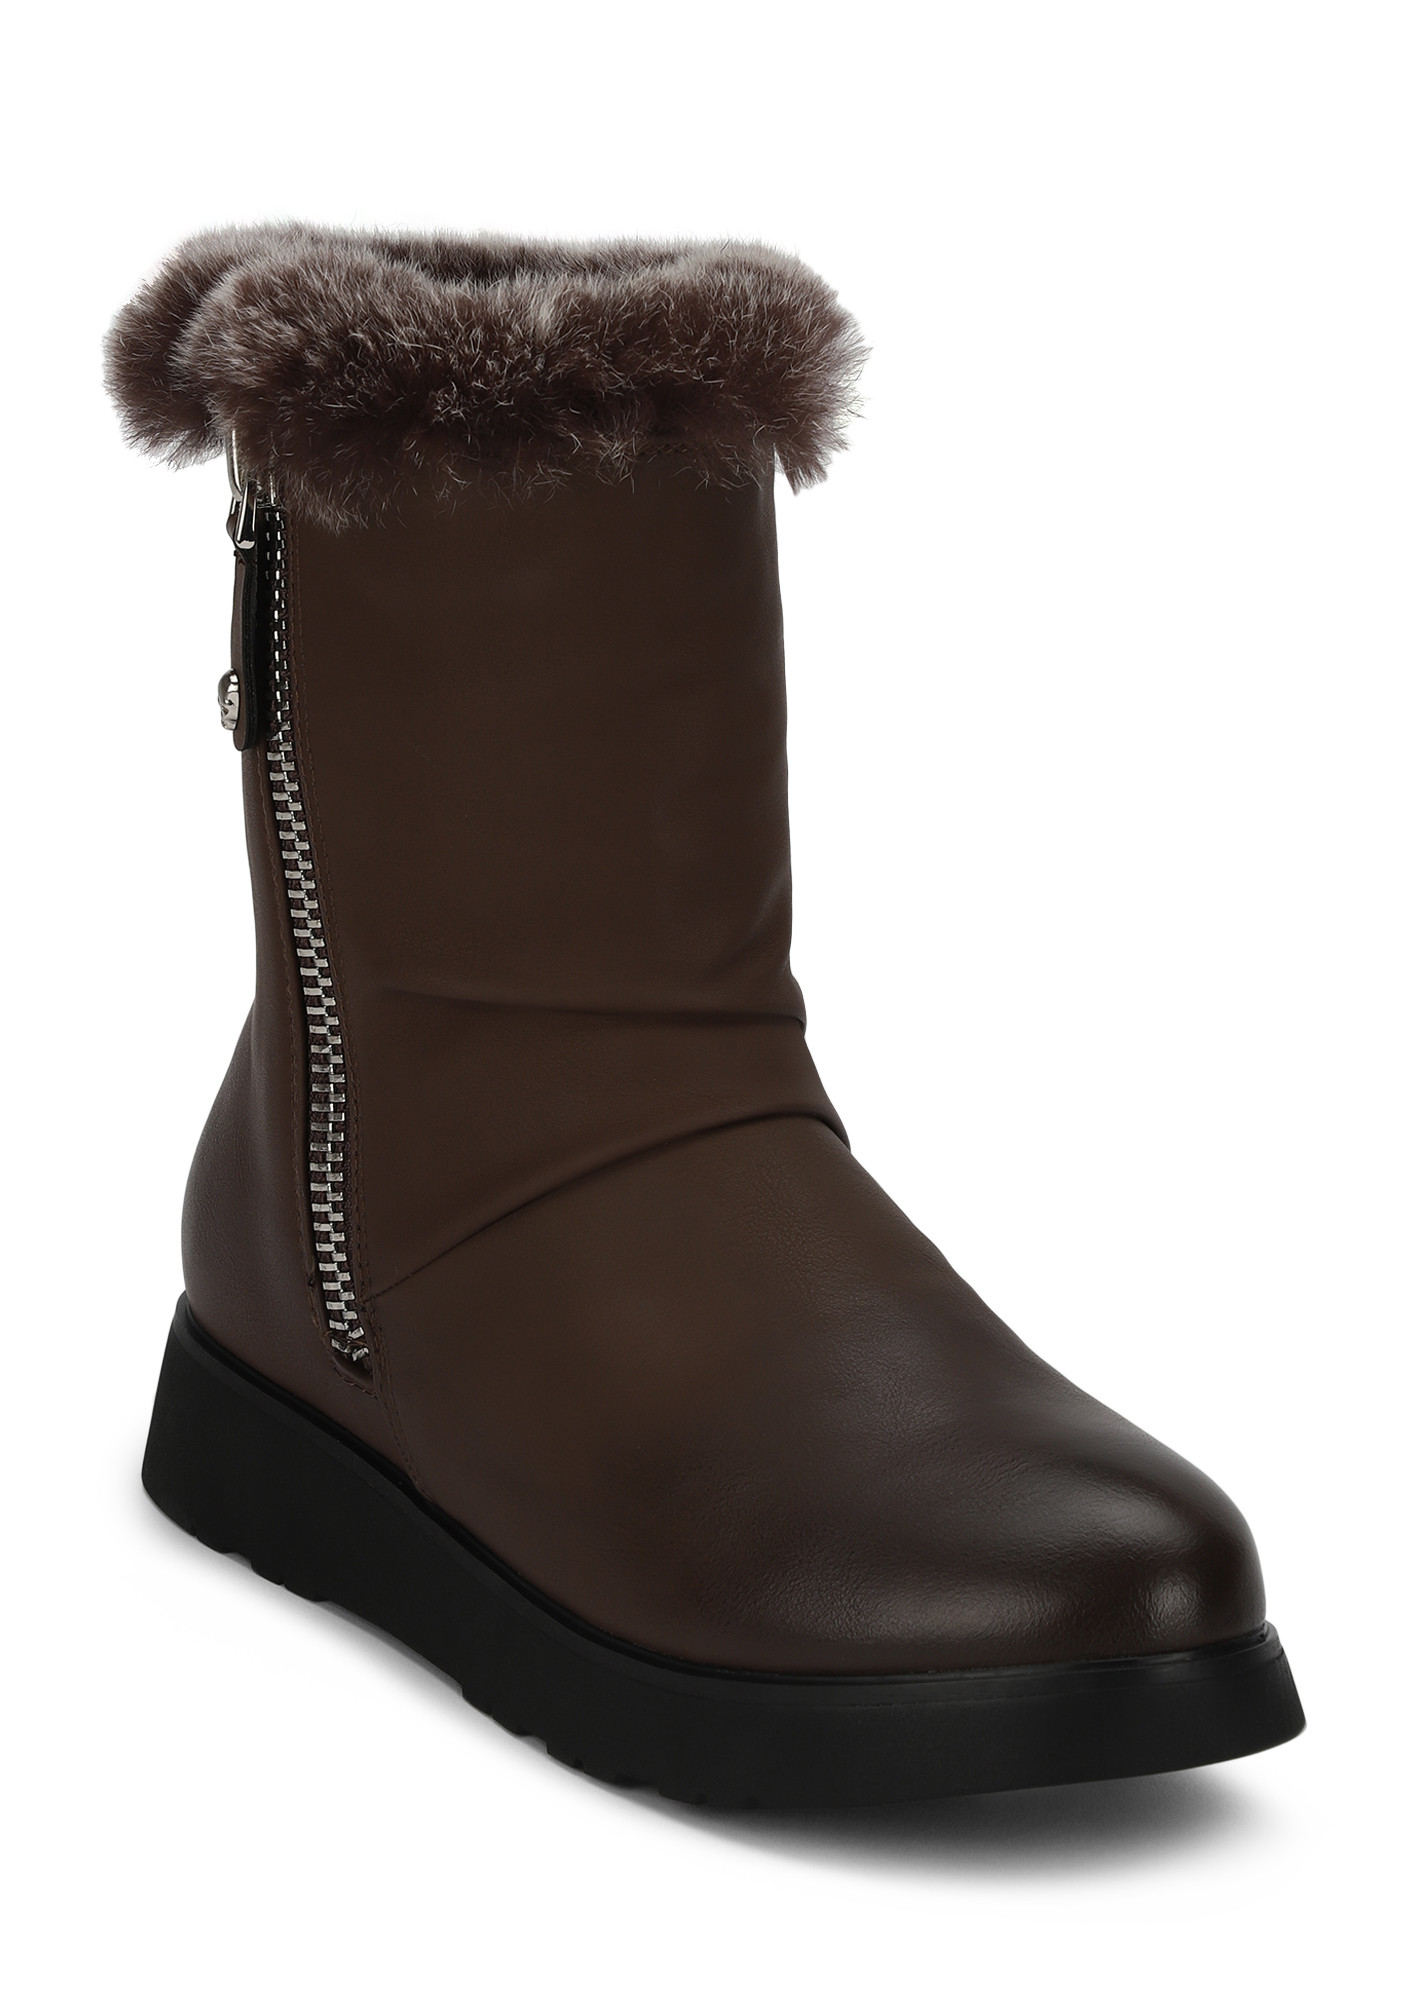 NEW IN TOWN BROWN ANKLE BOOTS